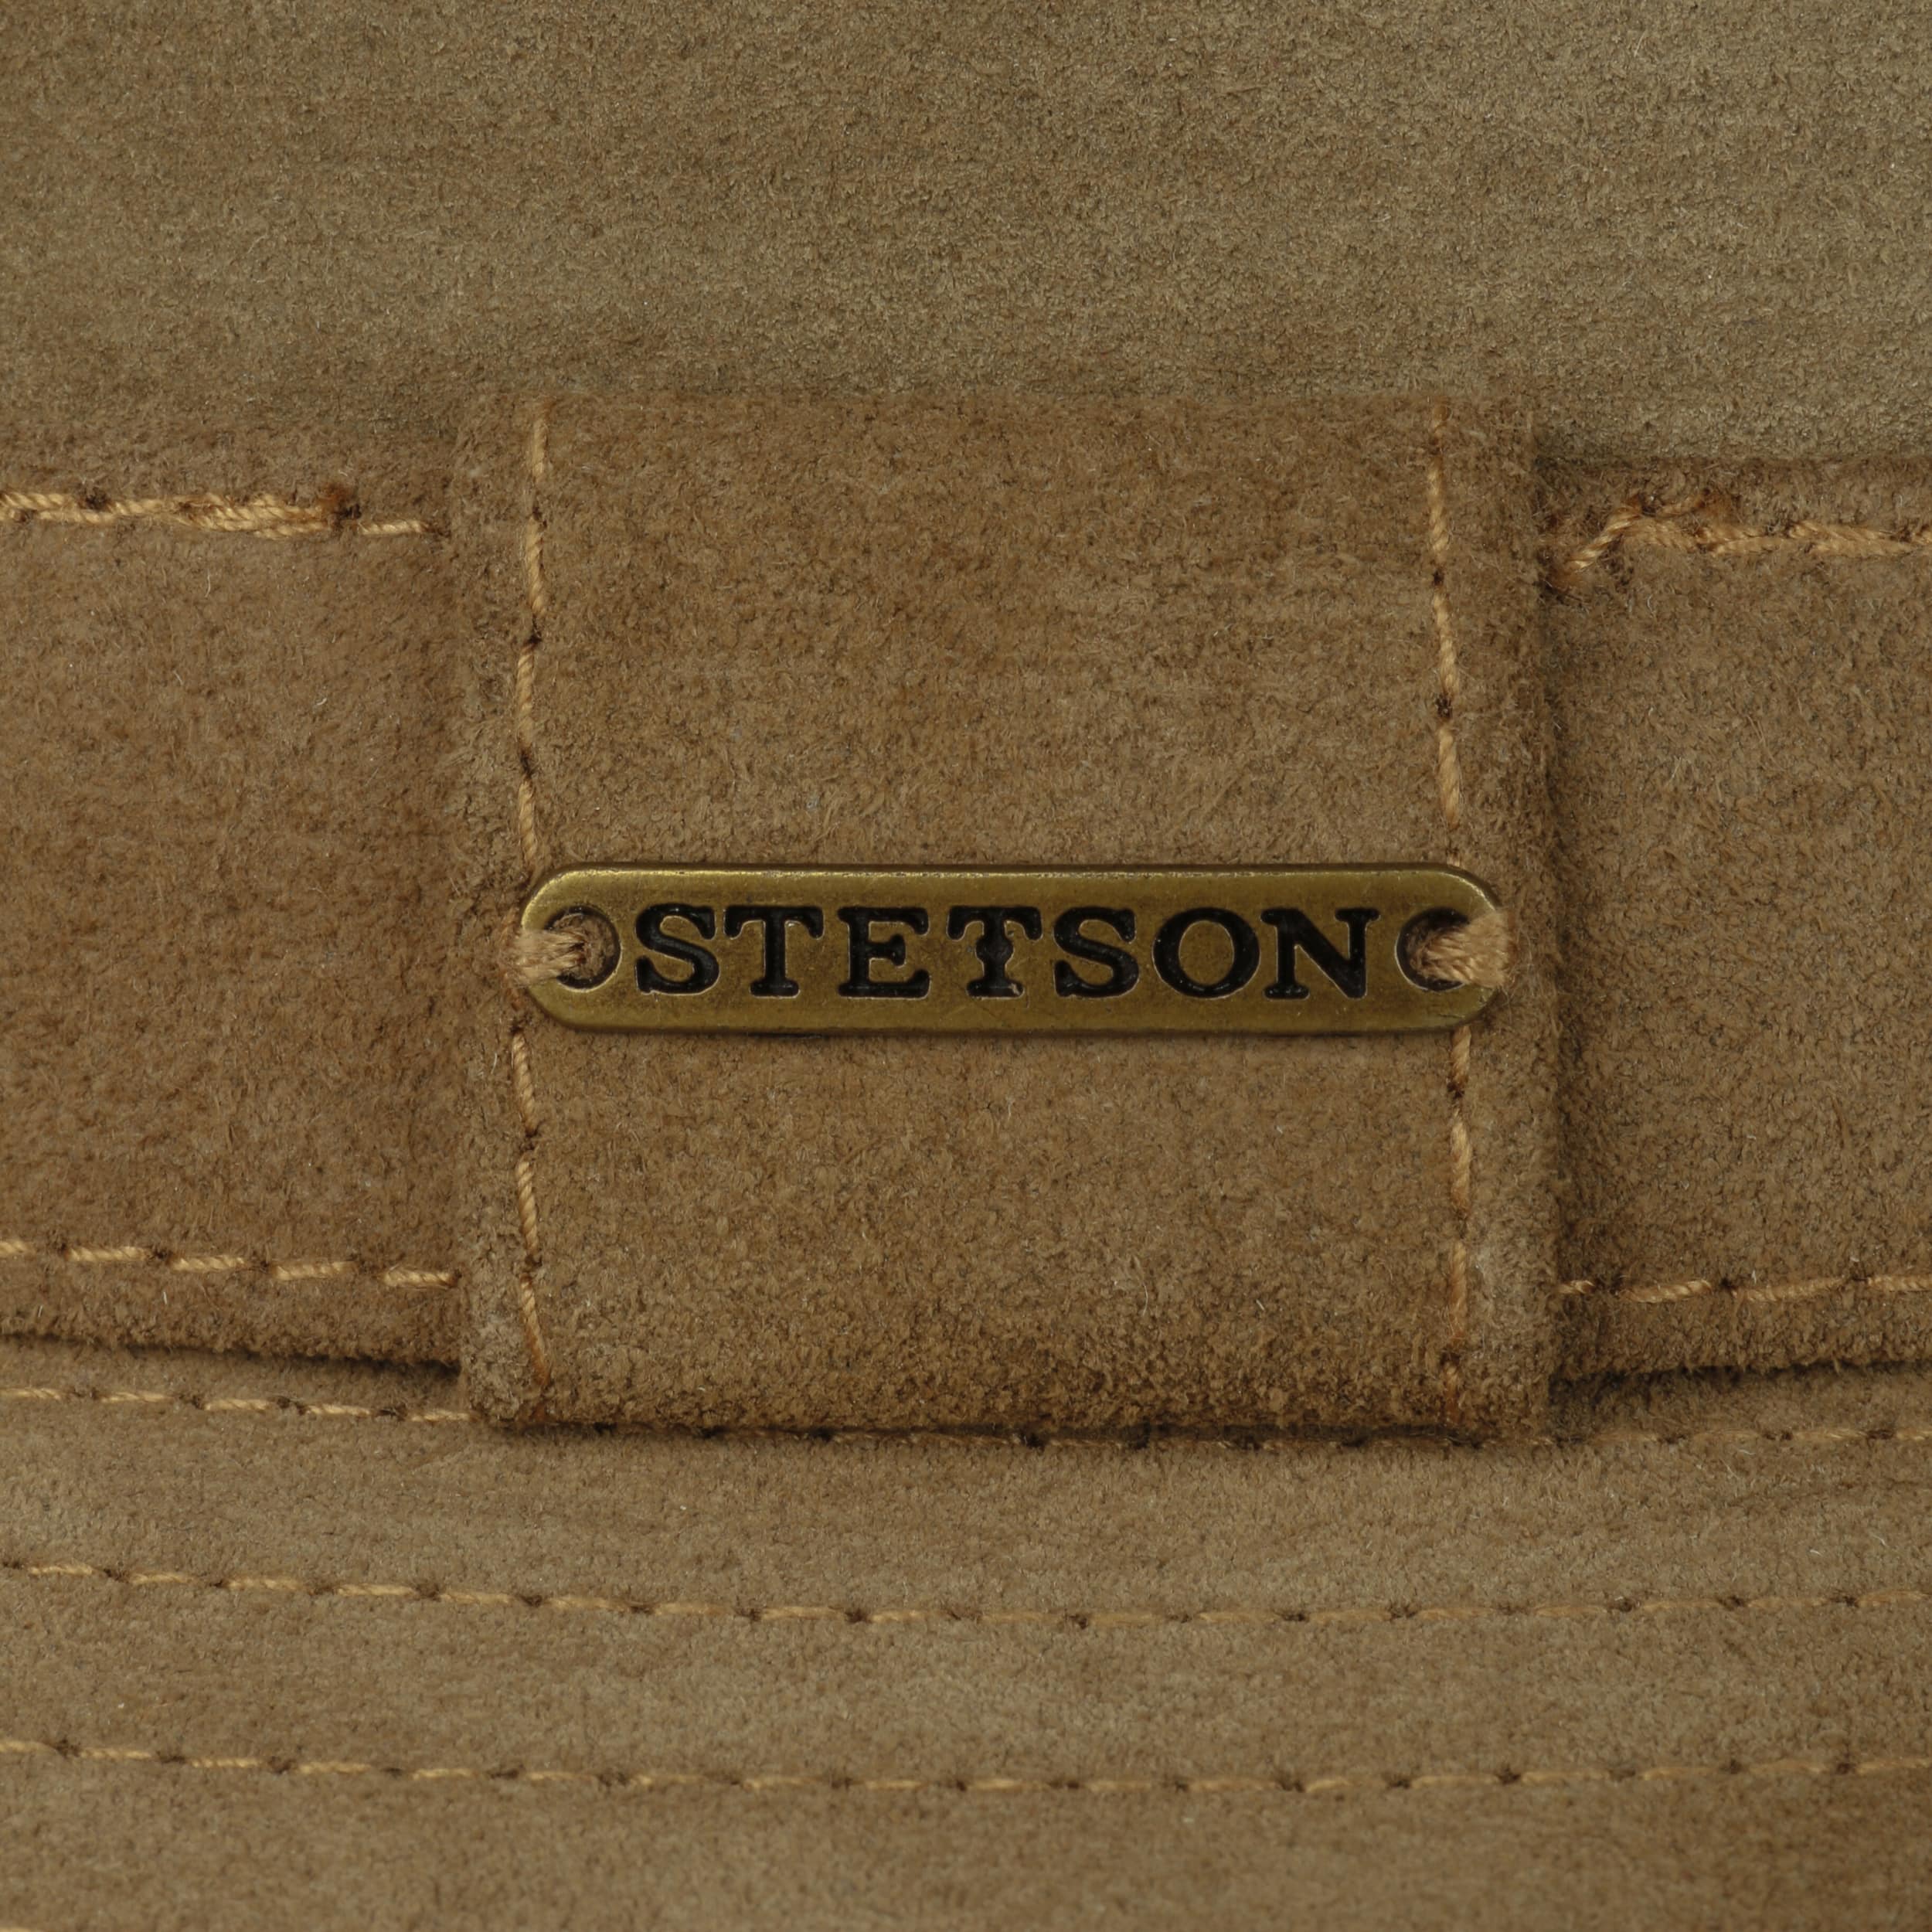 Calf Leather Traveller Hat by Stetson - 129,00